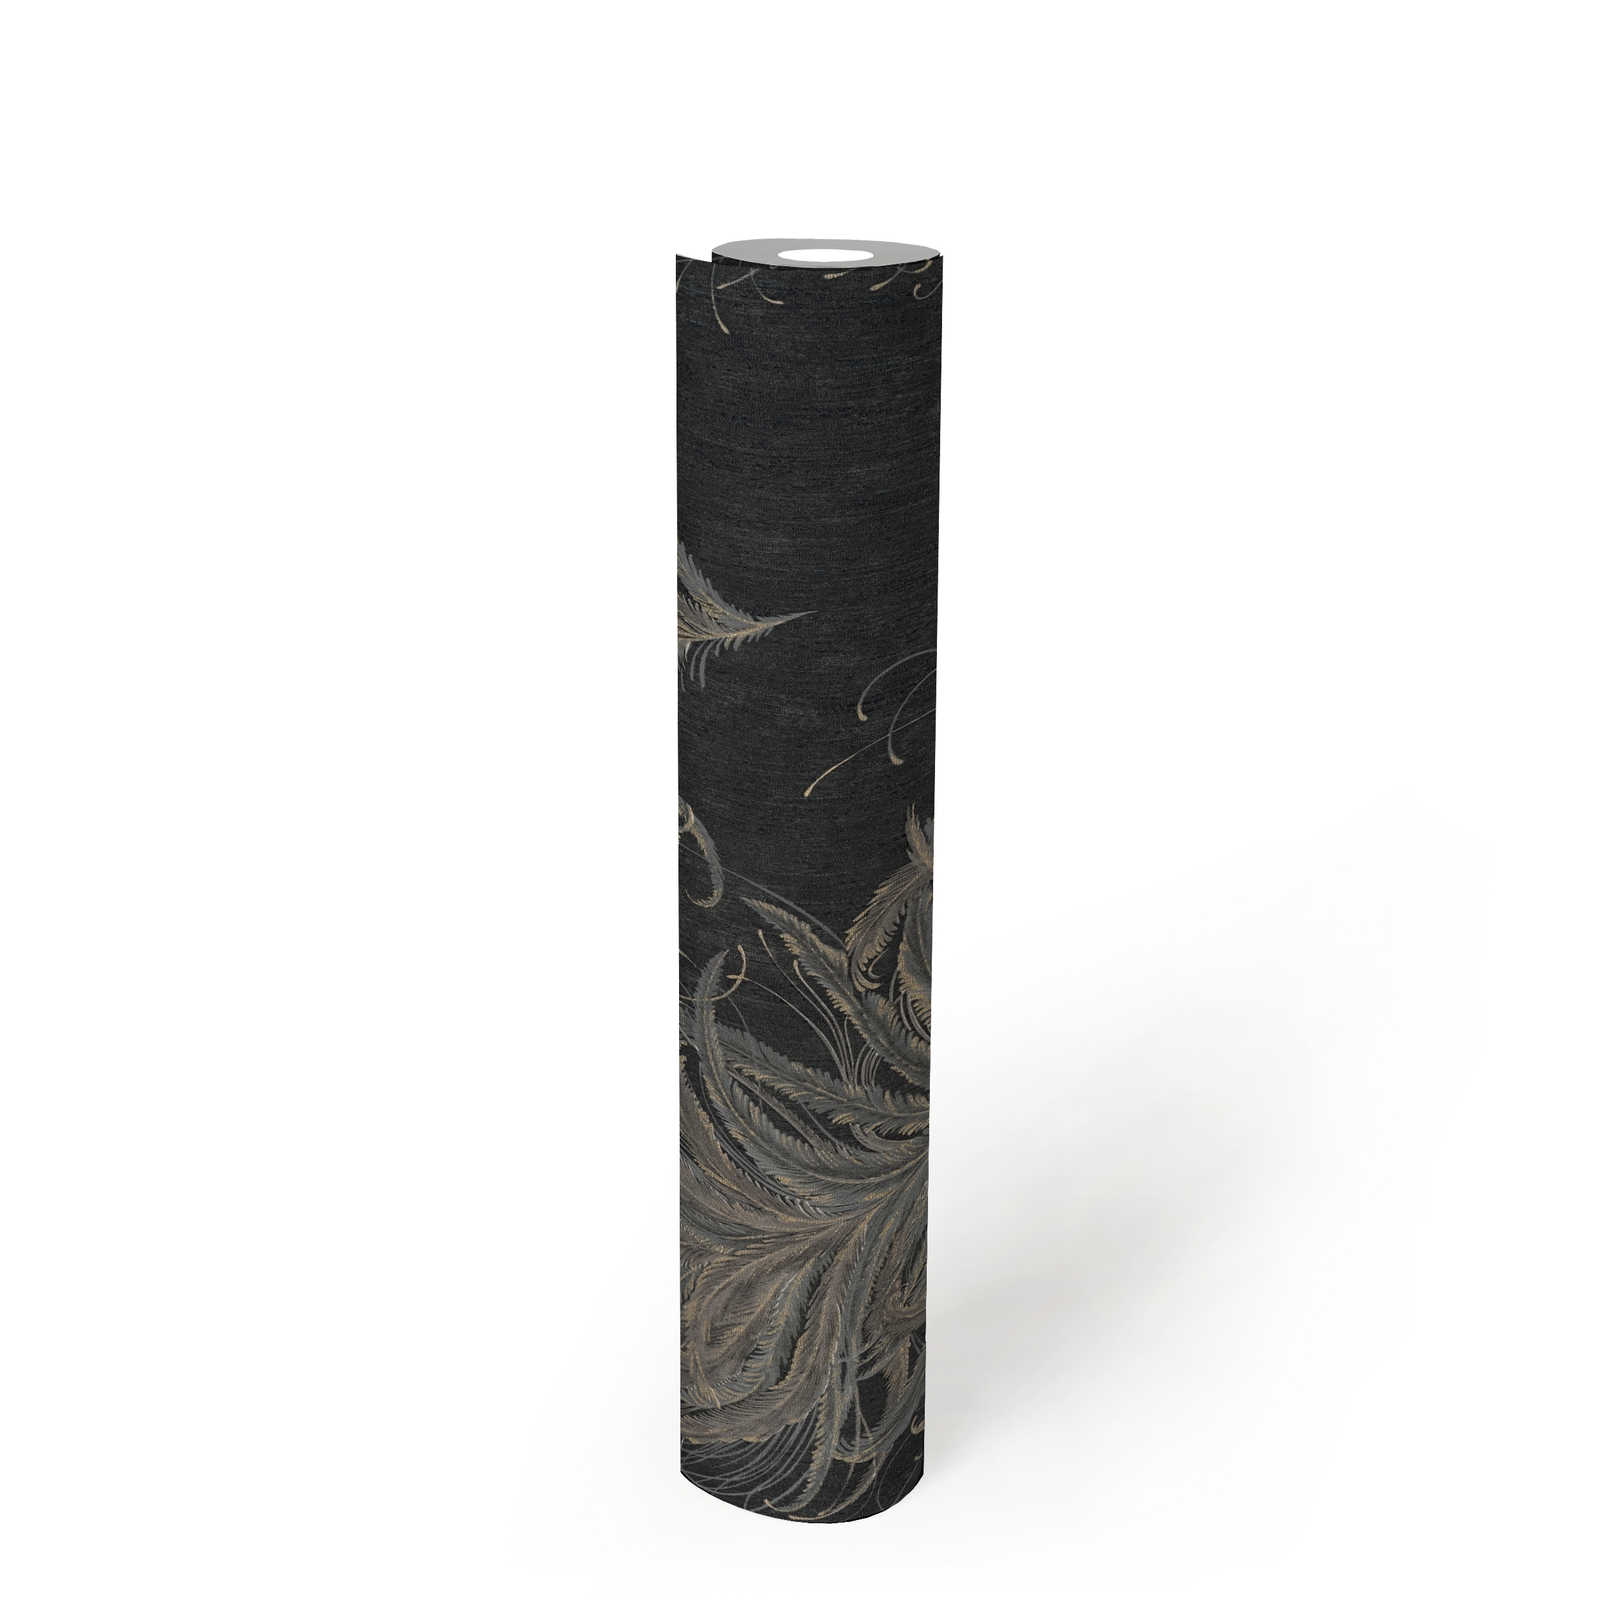             Black non-woven wallpaper with feathers in metallic colours
        